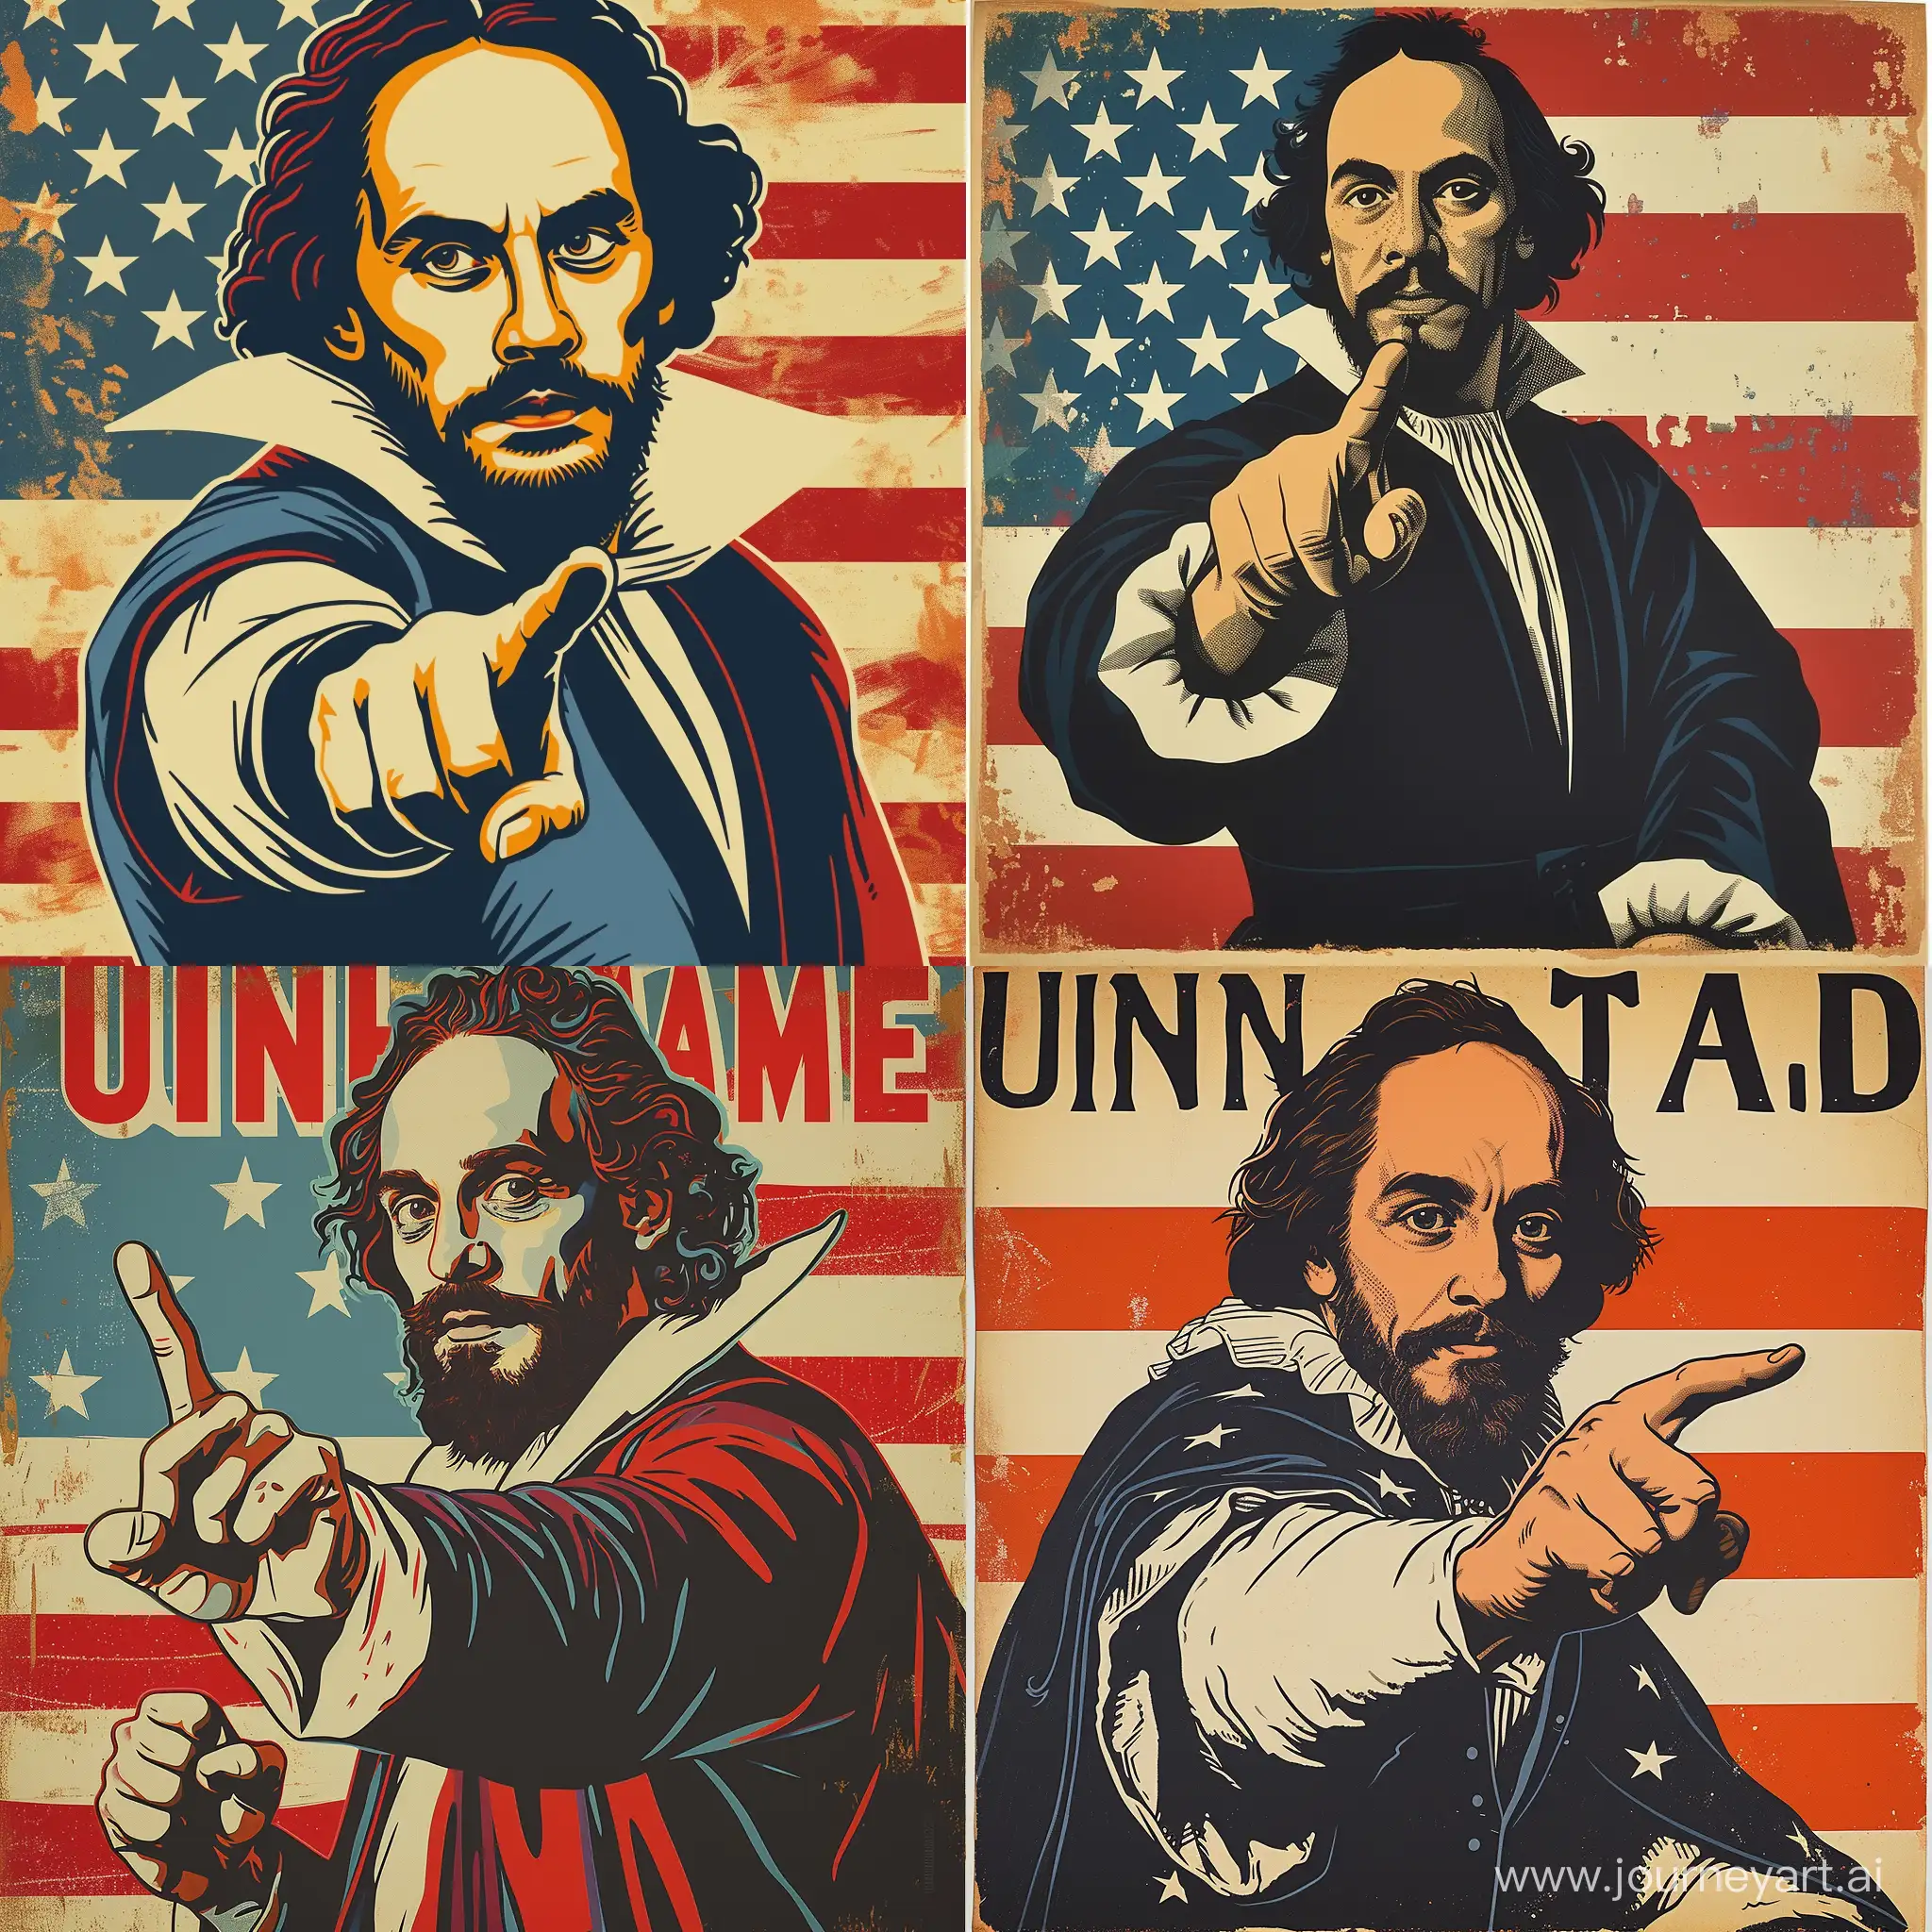 William-Shakespeare-in-Uncle-Sam-Style-Pointing-Gesture